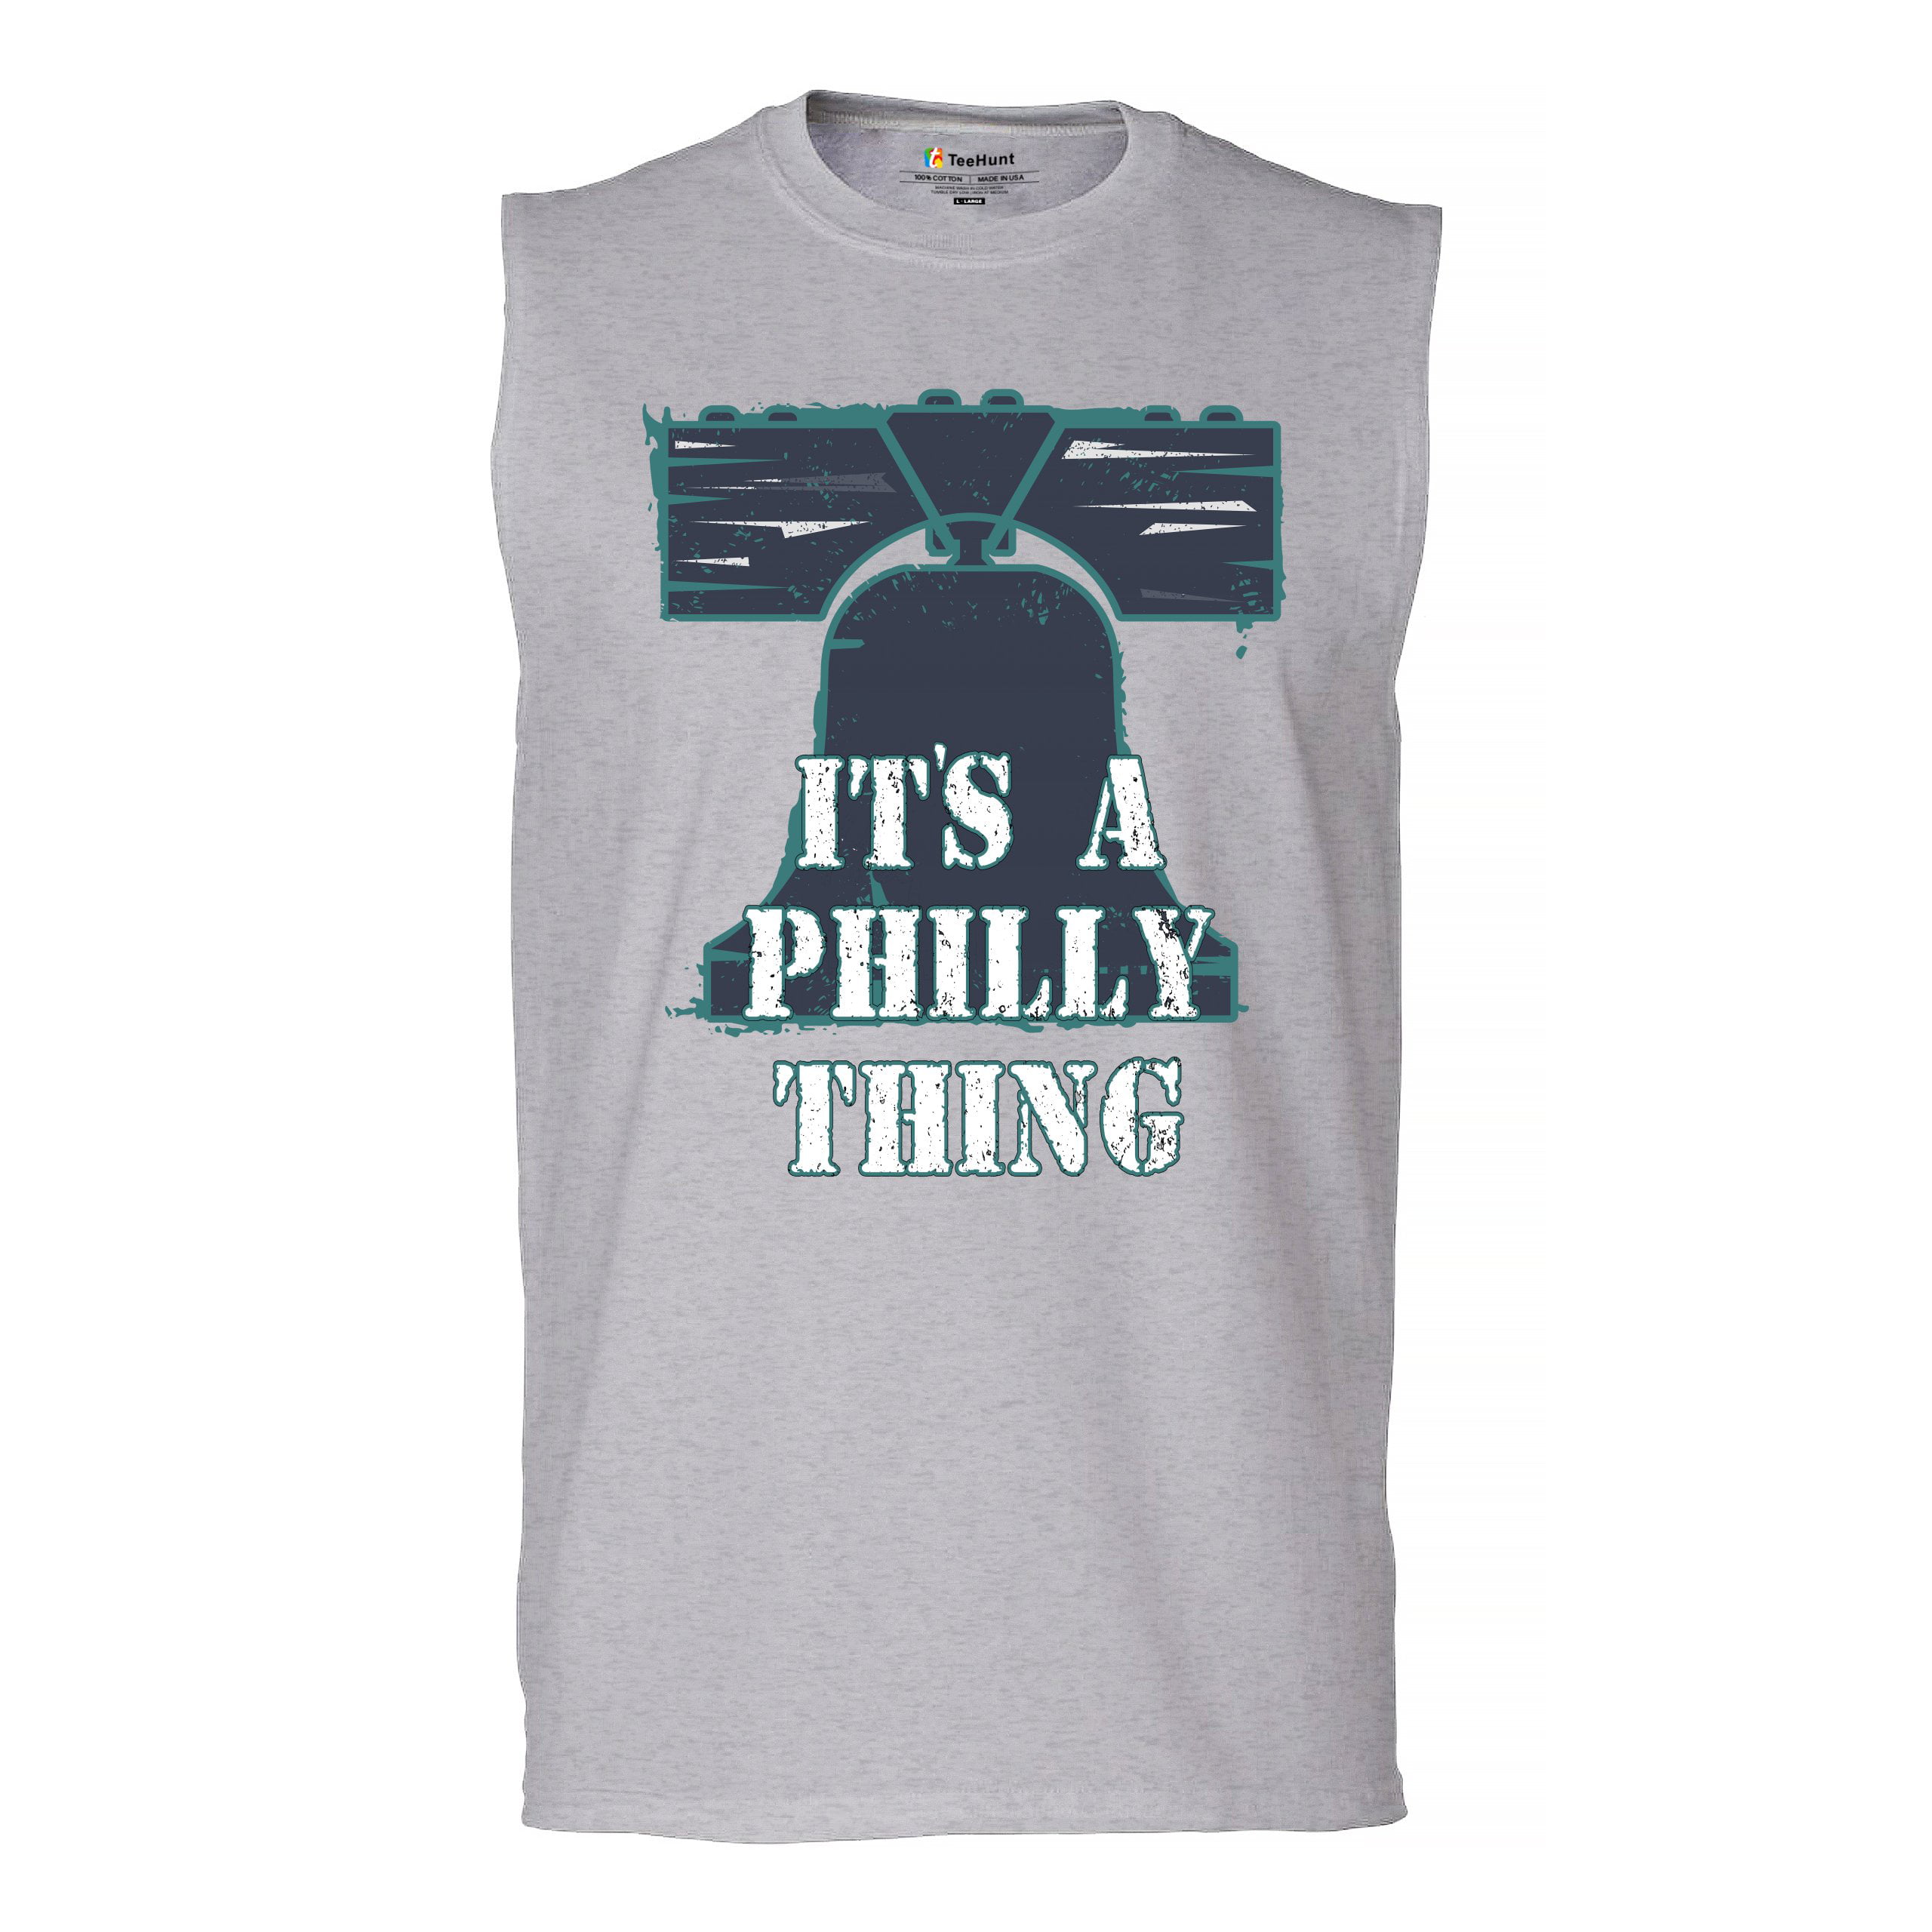 It's a Philly Thing Funny Muscle Shirt Philadelphia Championship City ...